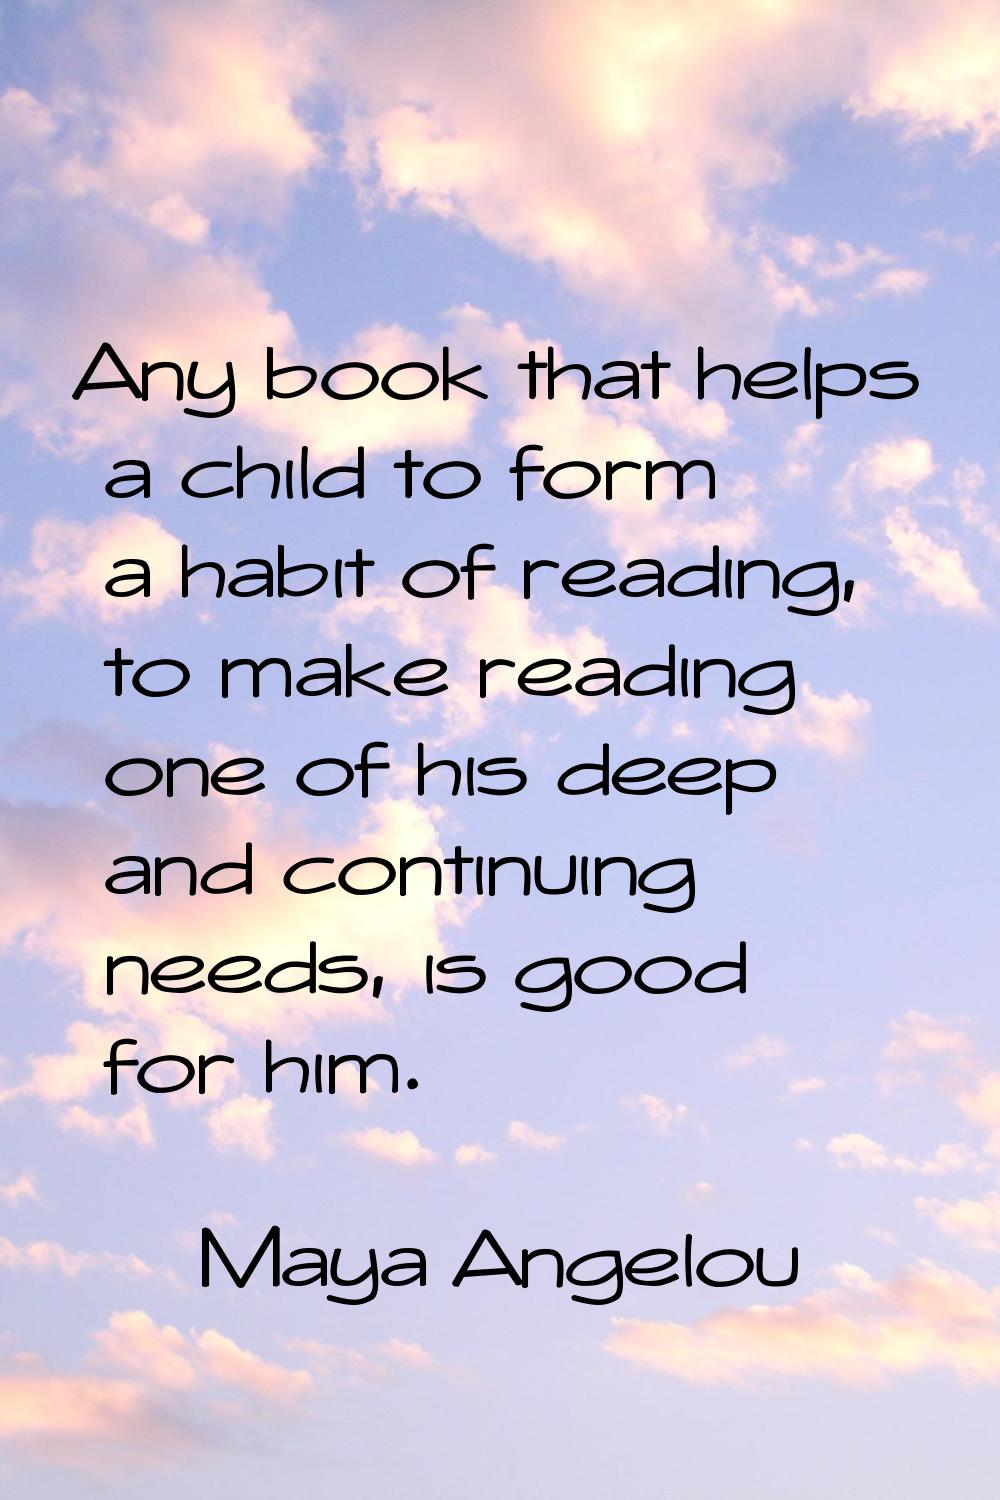 Any book that helps a child to form a habit of reading, to make reading one of his deep and continu